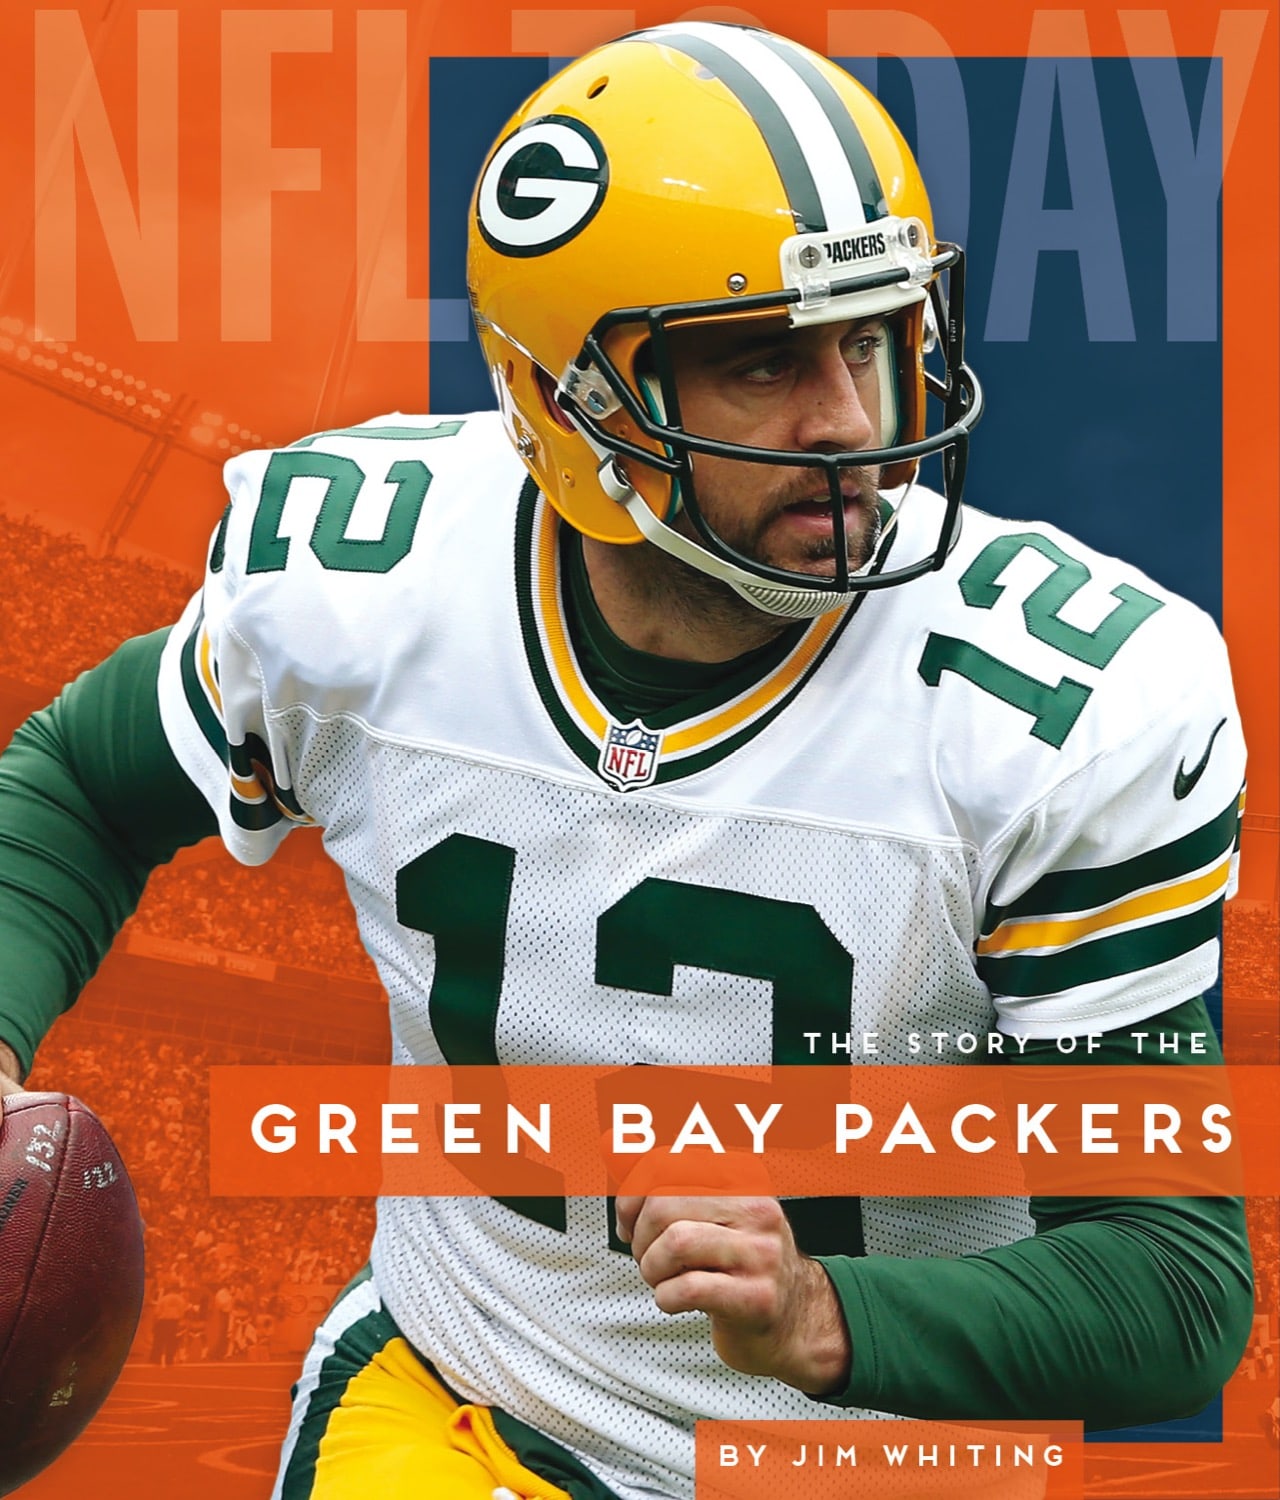 NFL Today: Green Bay Packers